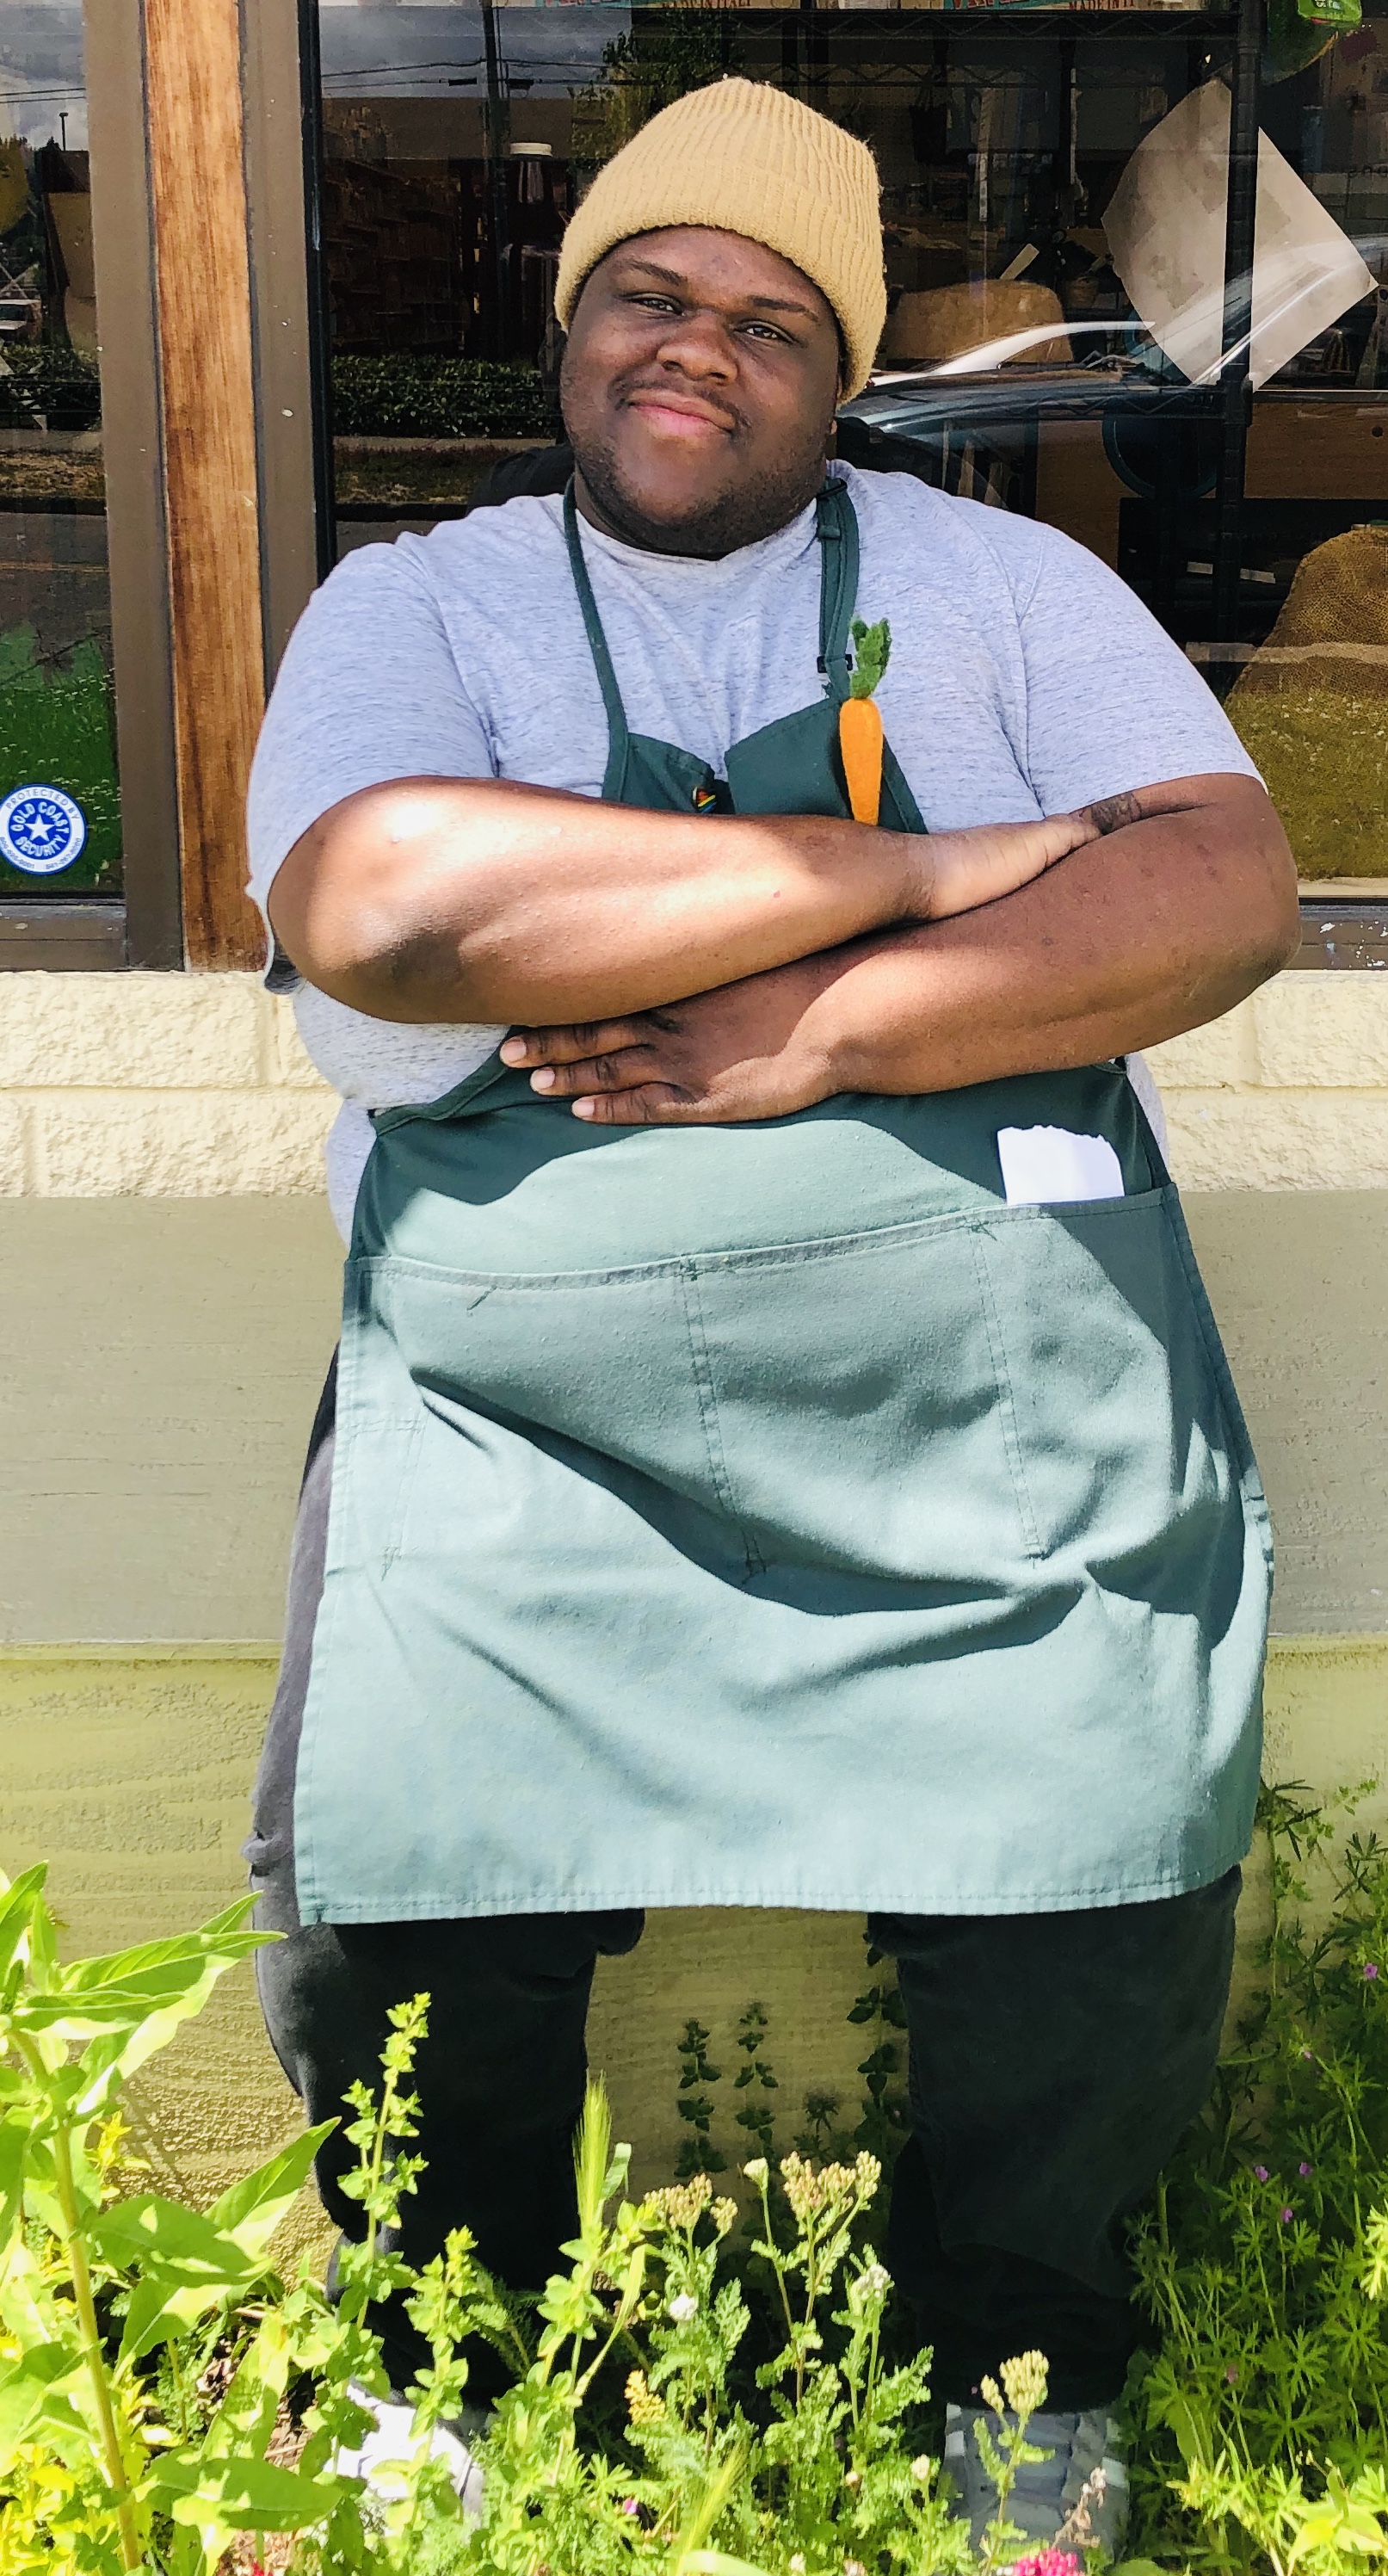 Pic of Jamr in front of Co-op wearing apron, arms crossed